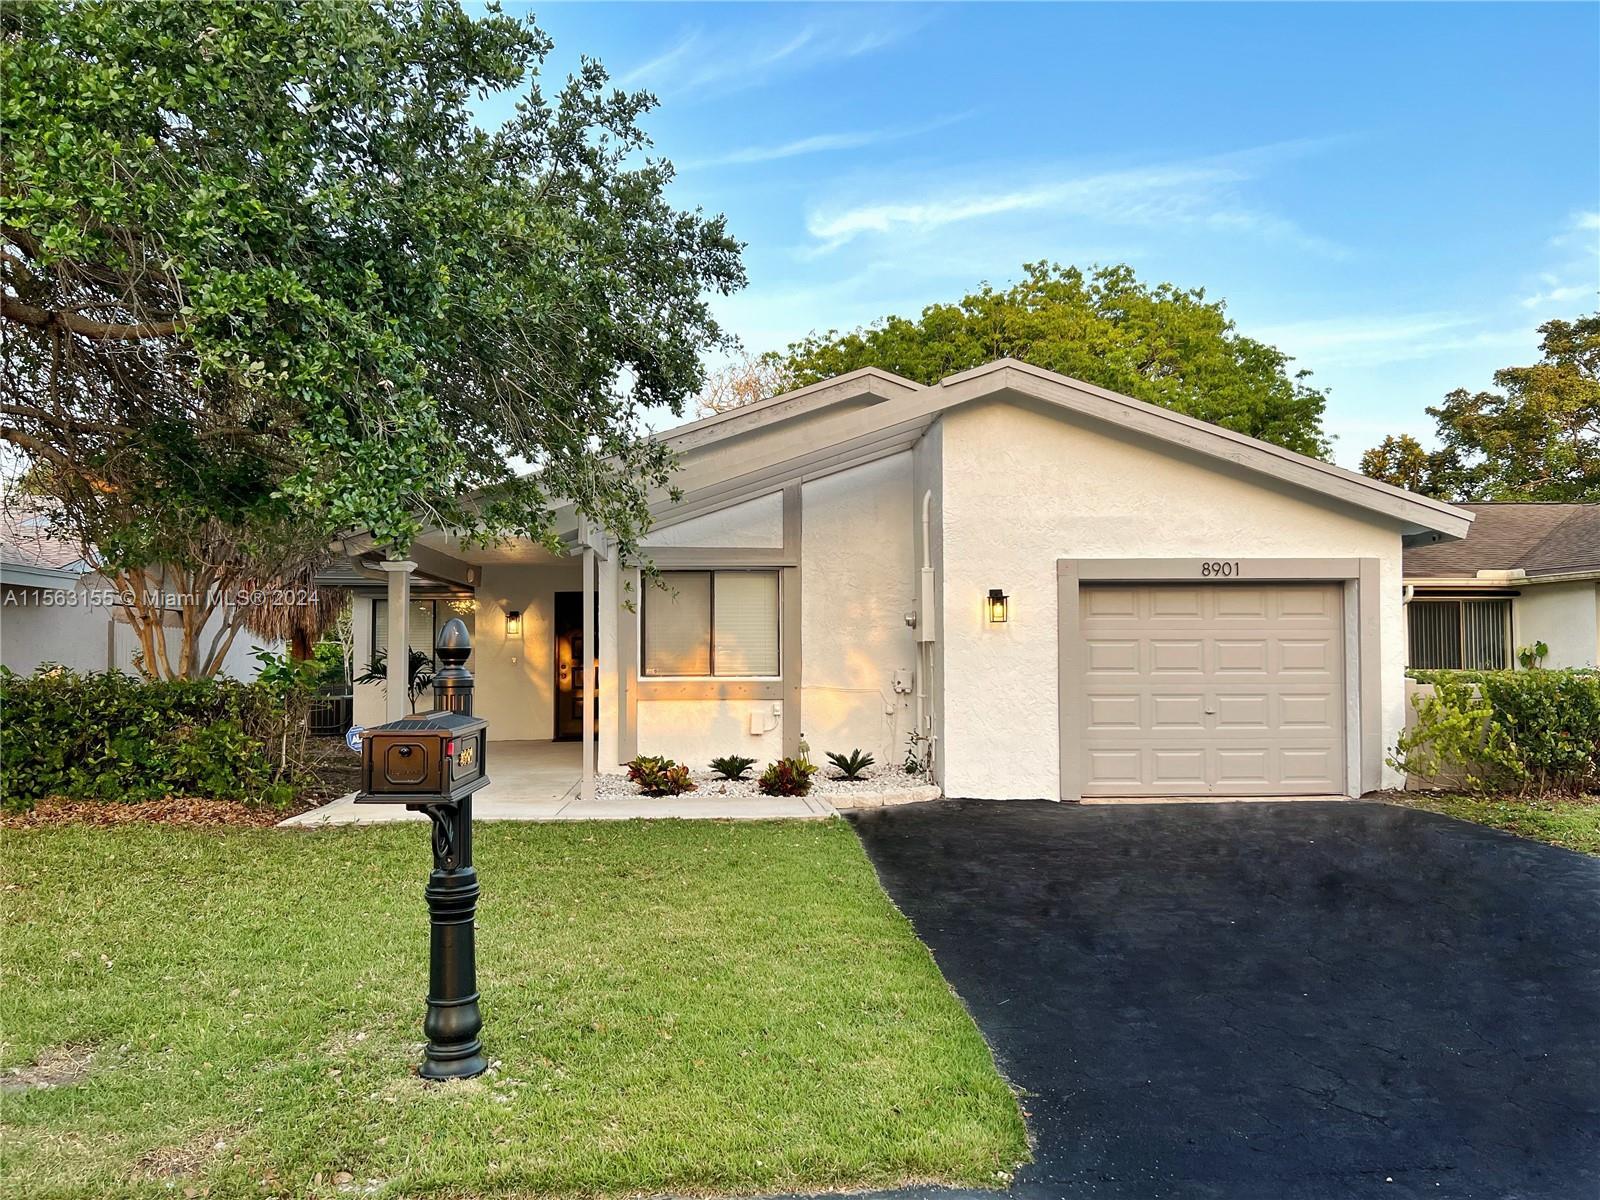 Photo of 8901 NW 9th Pl in Plantation, FL